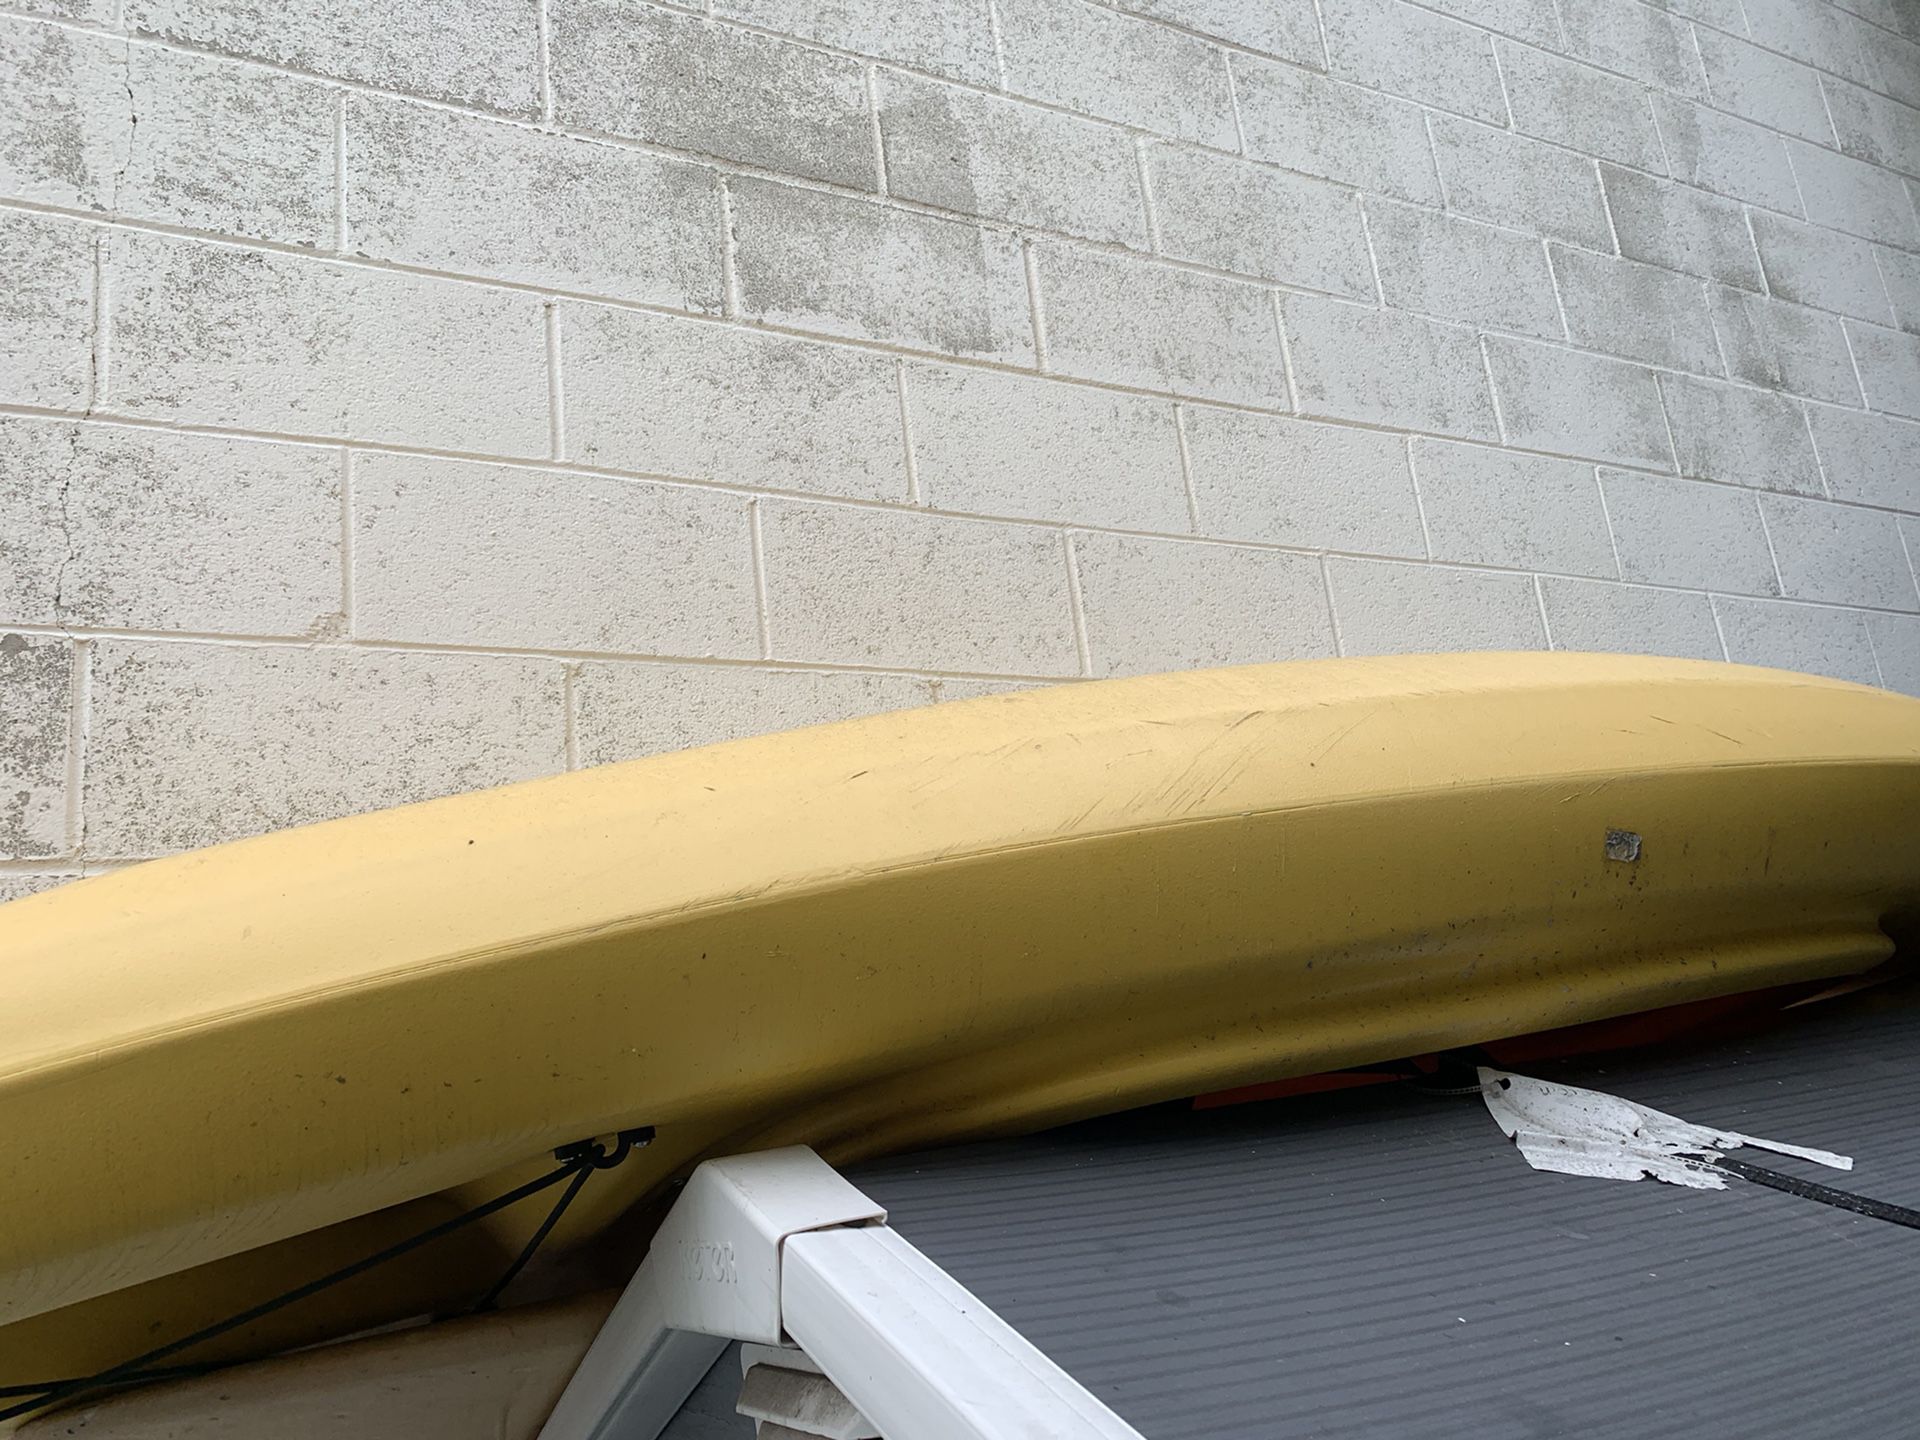 Dolphin kayak. Never used. Just bought and stored.